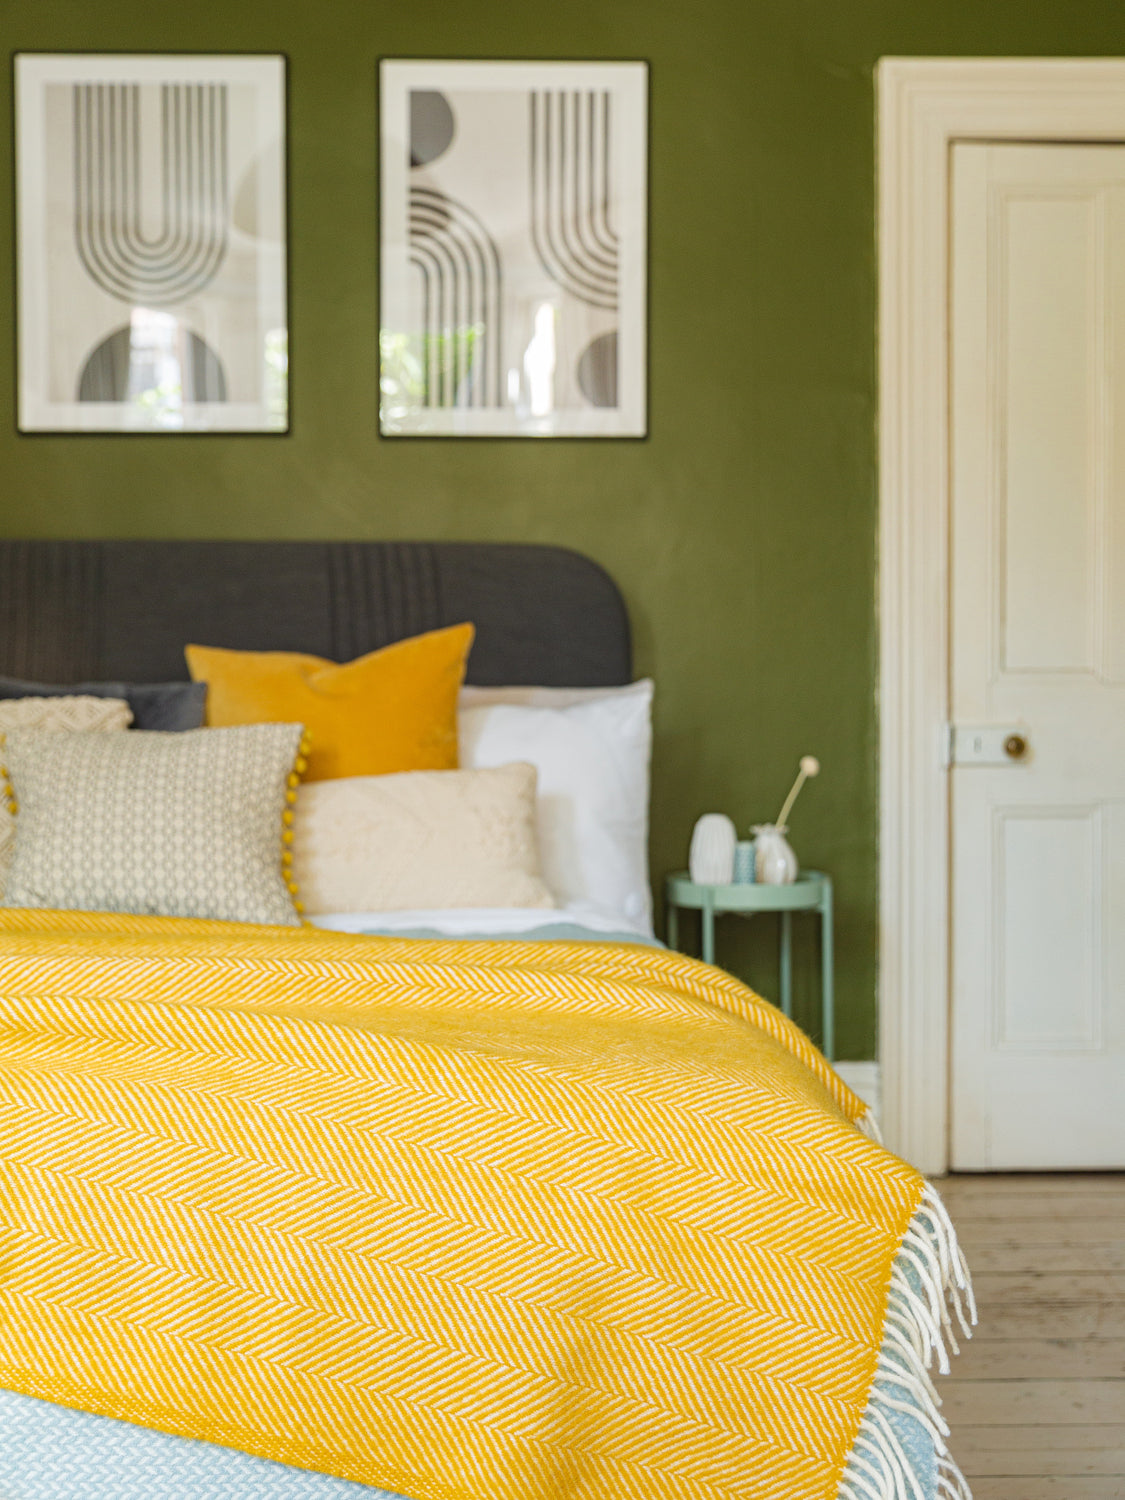 Extra large yellow herringbone wool throw spread across a bed